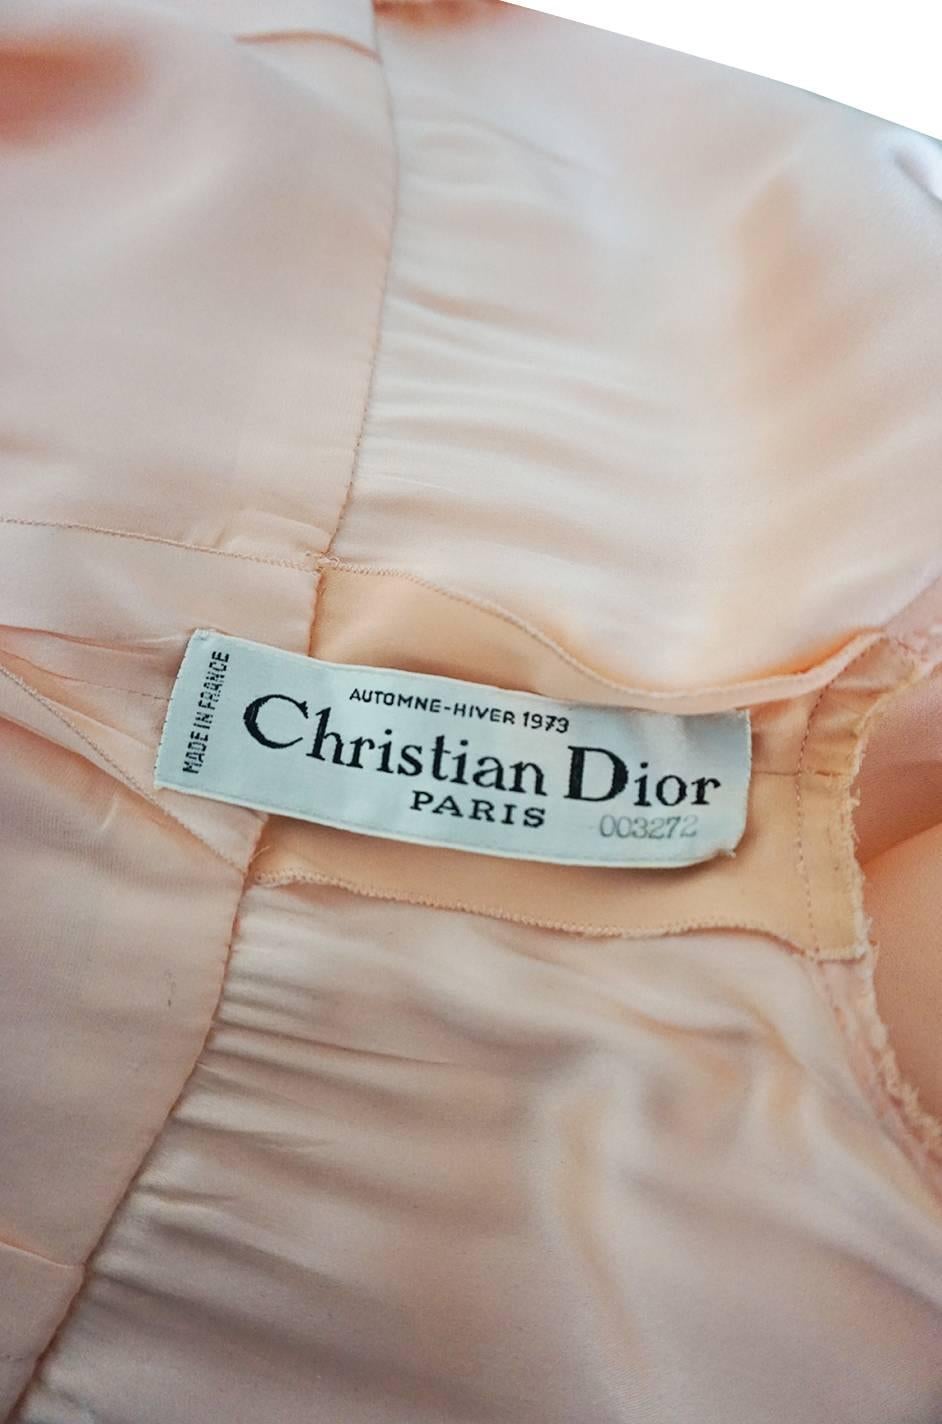 Christian Dior Haute Couture Intricately Pleated Silk Dress, A / W 1973 ...